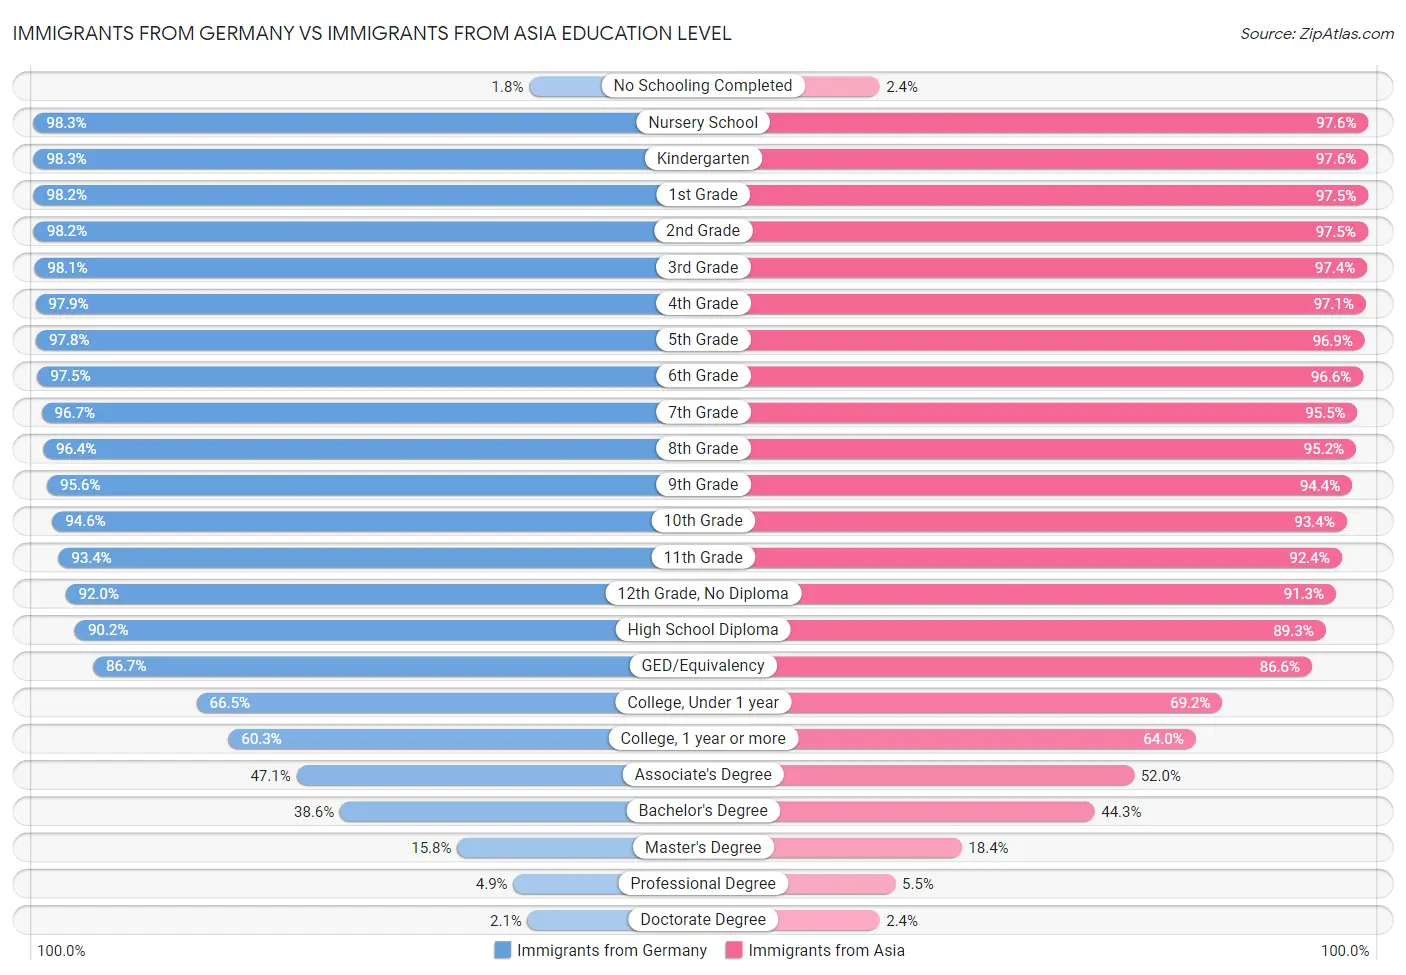 Immigrants from Germany vs Immigrants from Asia Education Level